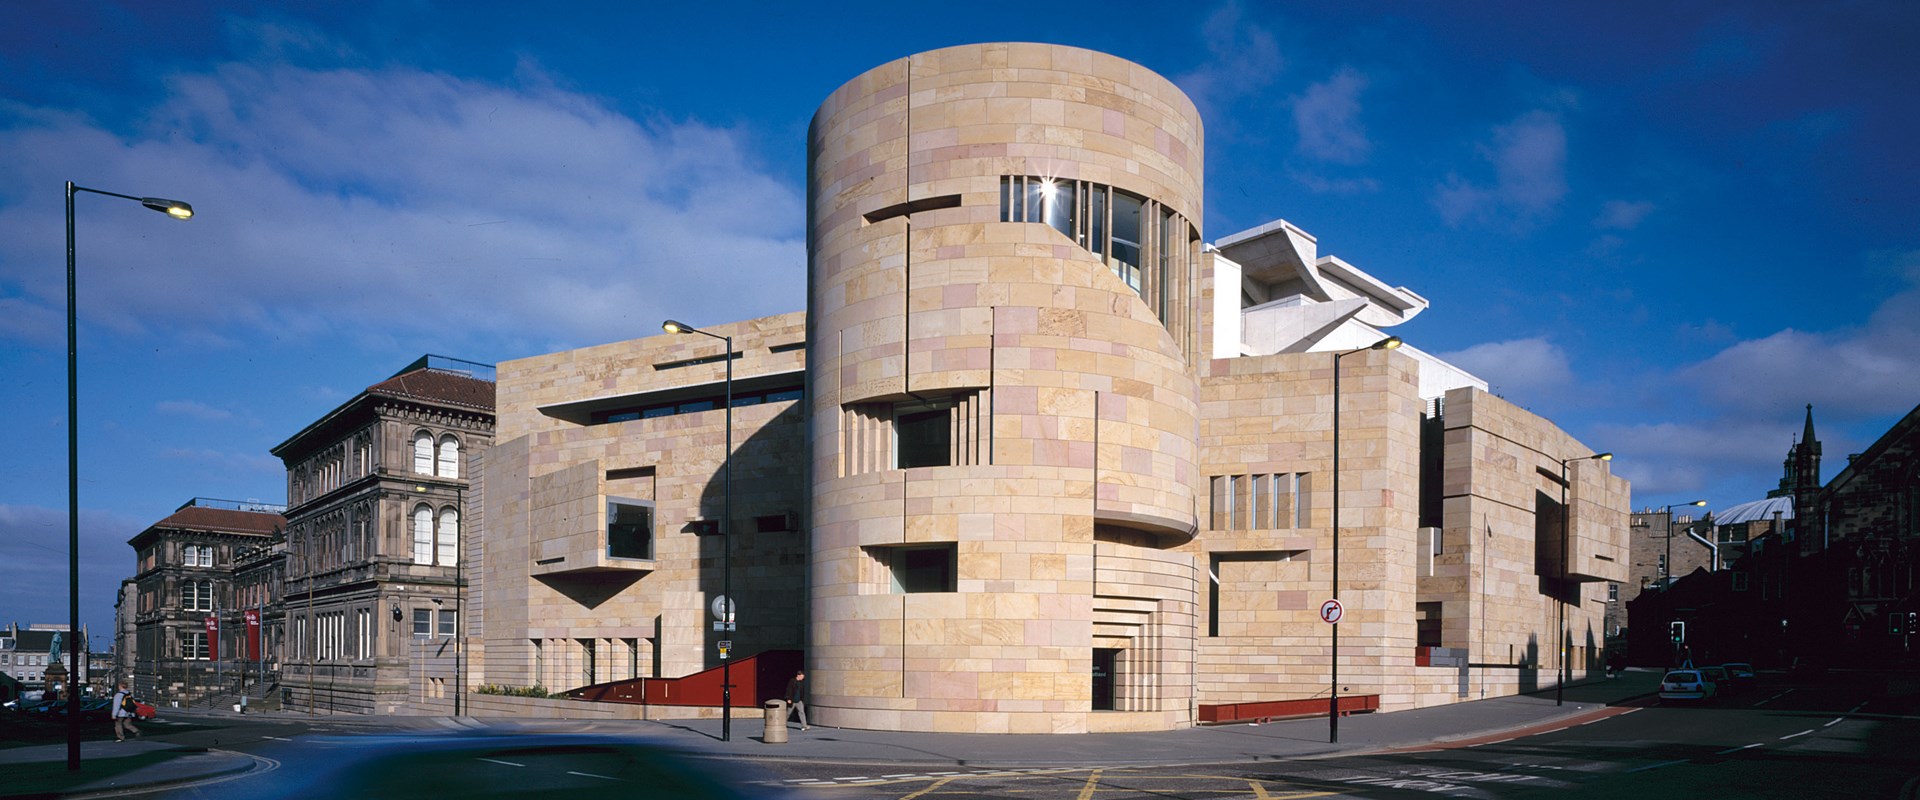 Architecture of the National Museum of Scotland